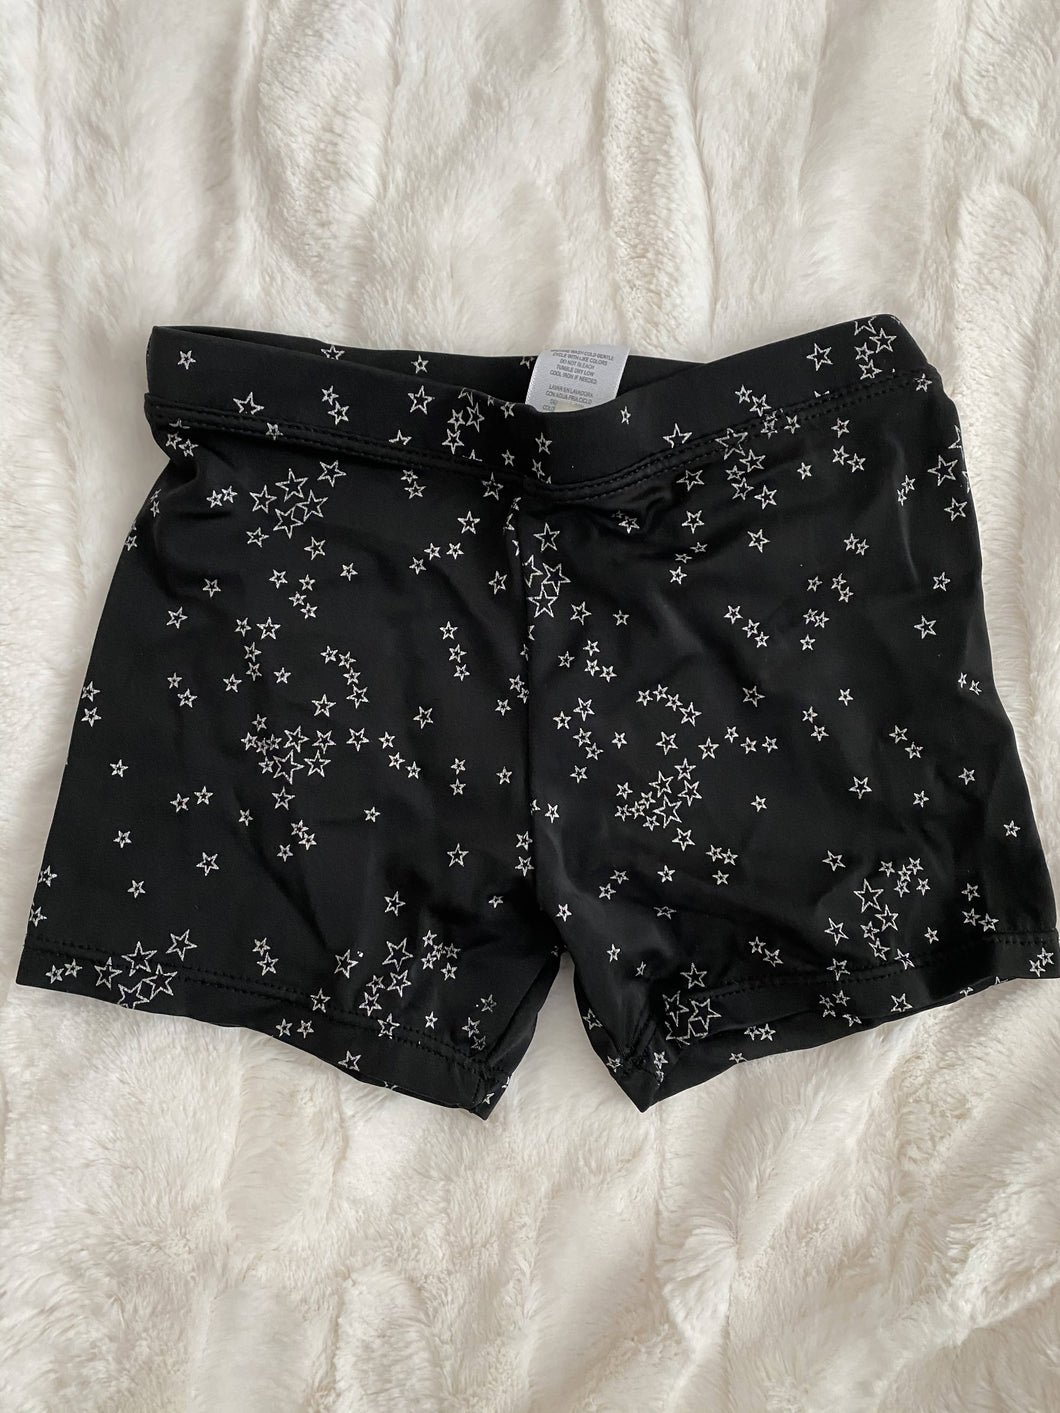 Black and silver star dance shorts size 6